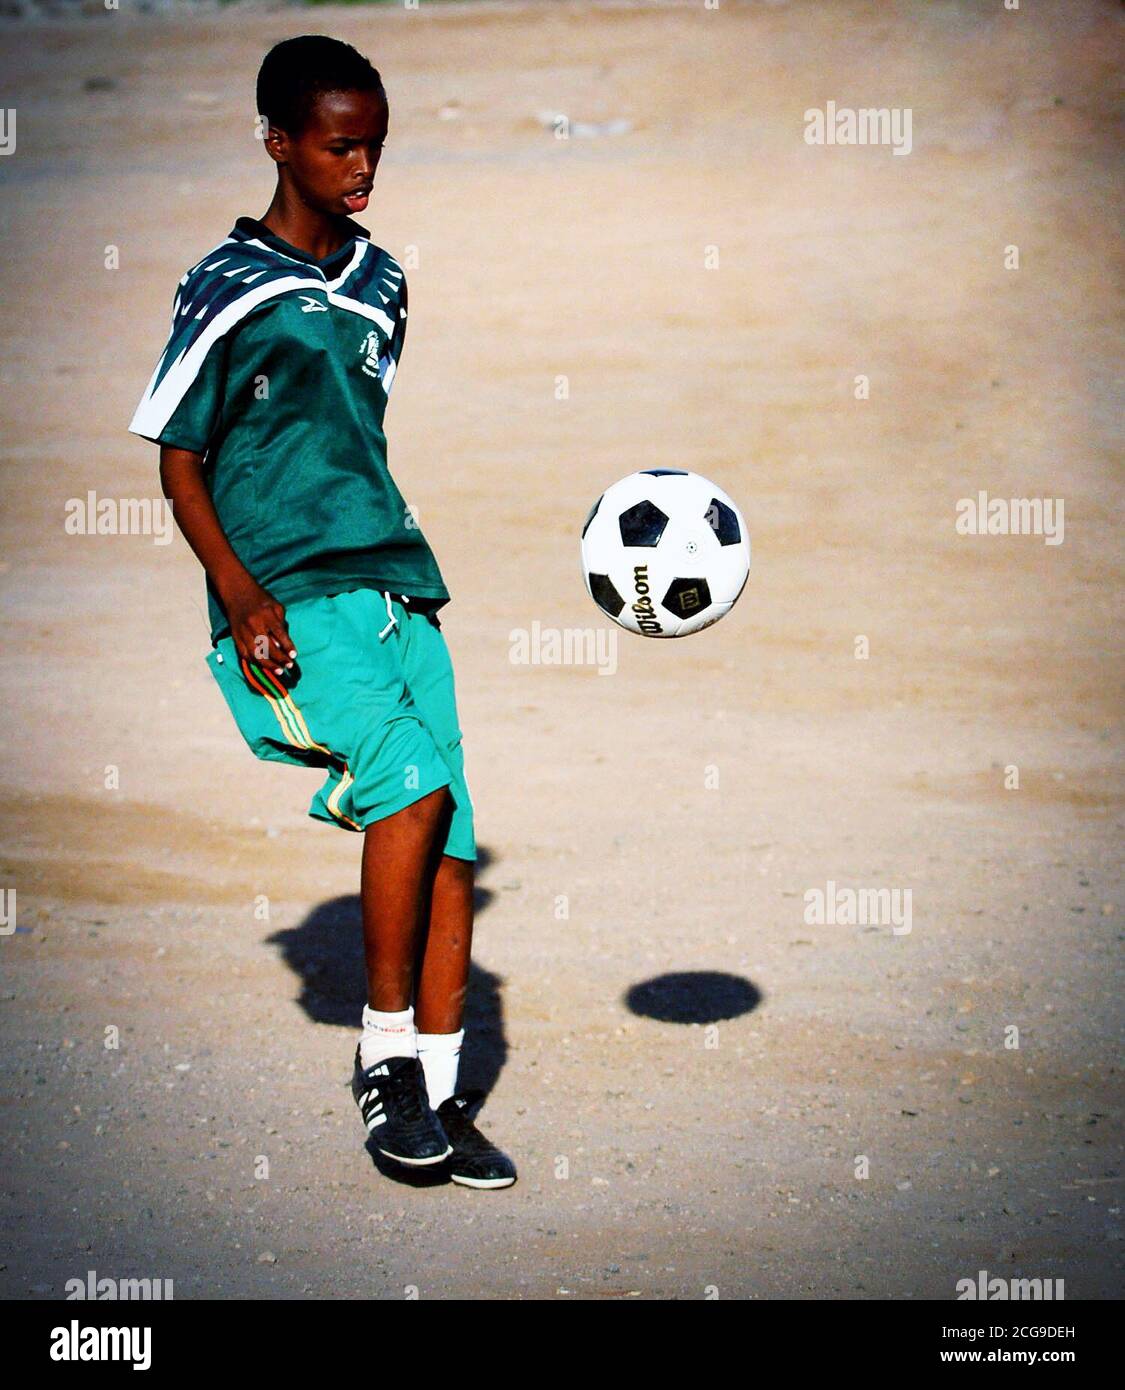 A boy from the Djibouti City's Boy's Orphanage kicks a soccer ball donated by U.S. Military Service Members deployed with Combined Joint Task Force - Horn of Africa (CJTF-HOA).  - Horn of Africa is a unit of U.S. Central Command that conducts operations and training to assist Partner nations to combat terrorism in order to establish a secure environment and enable regional stability. Stock Photo